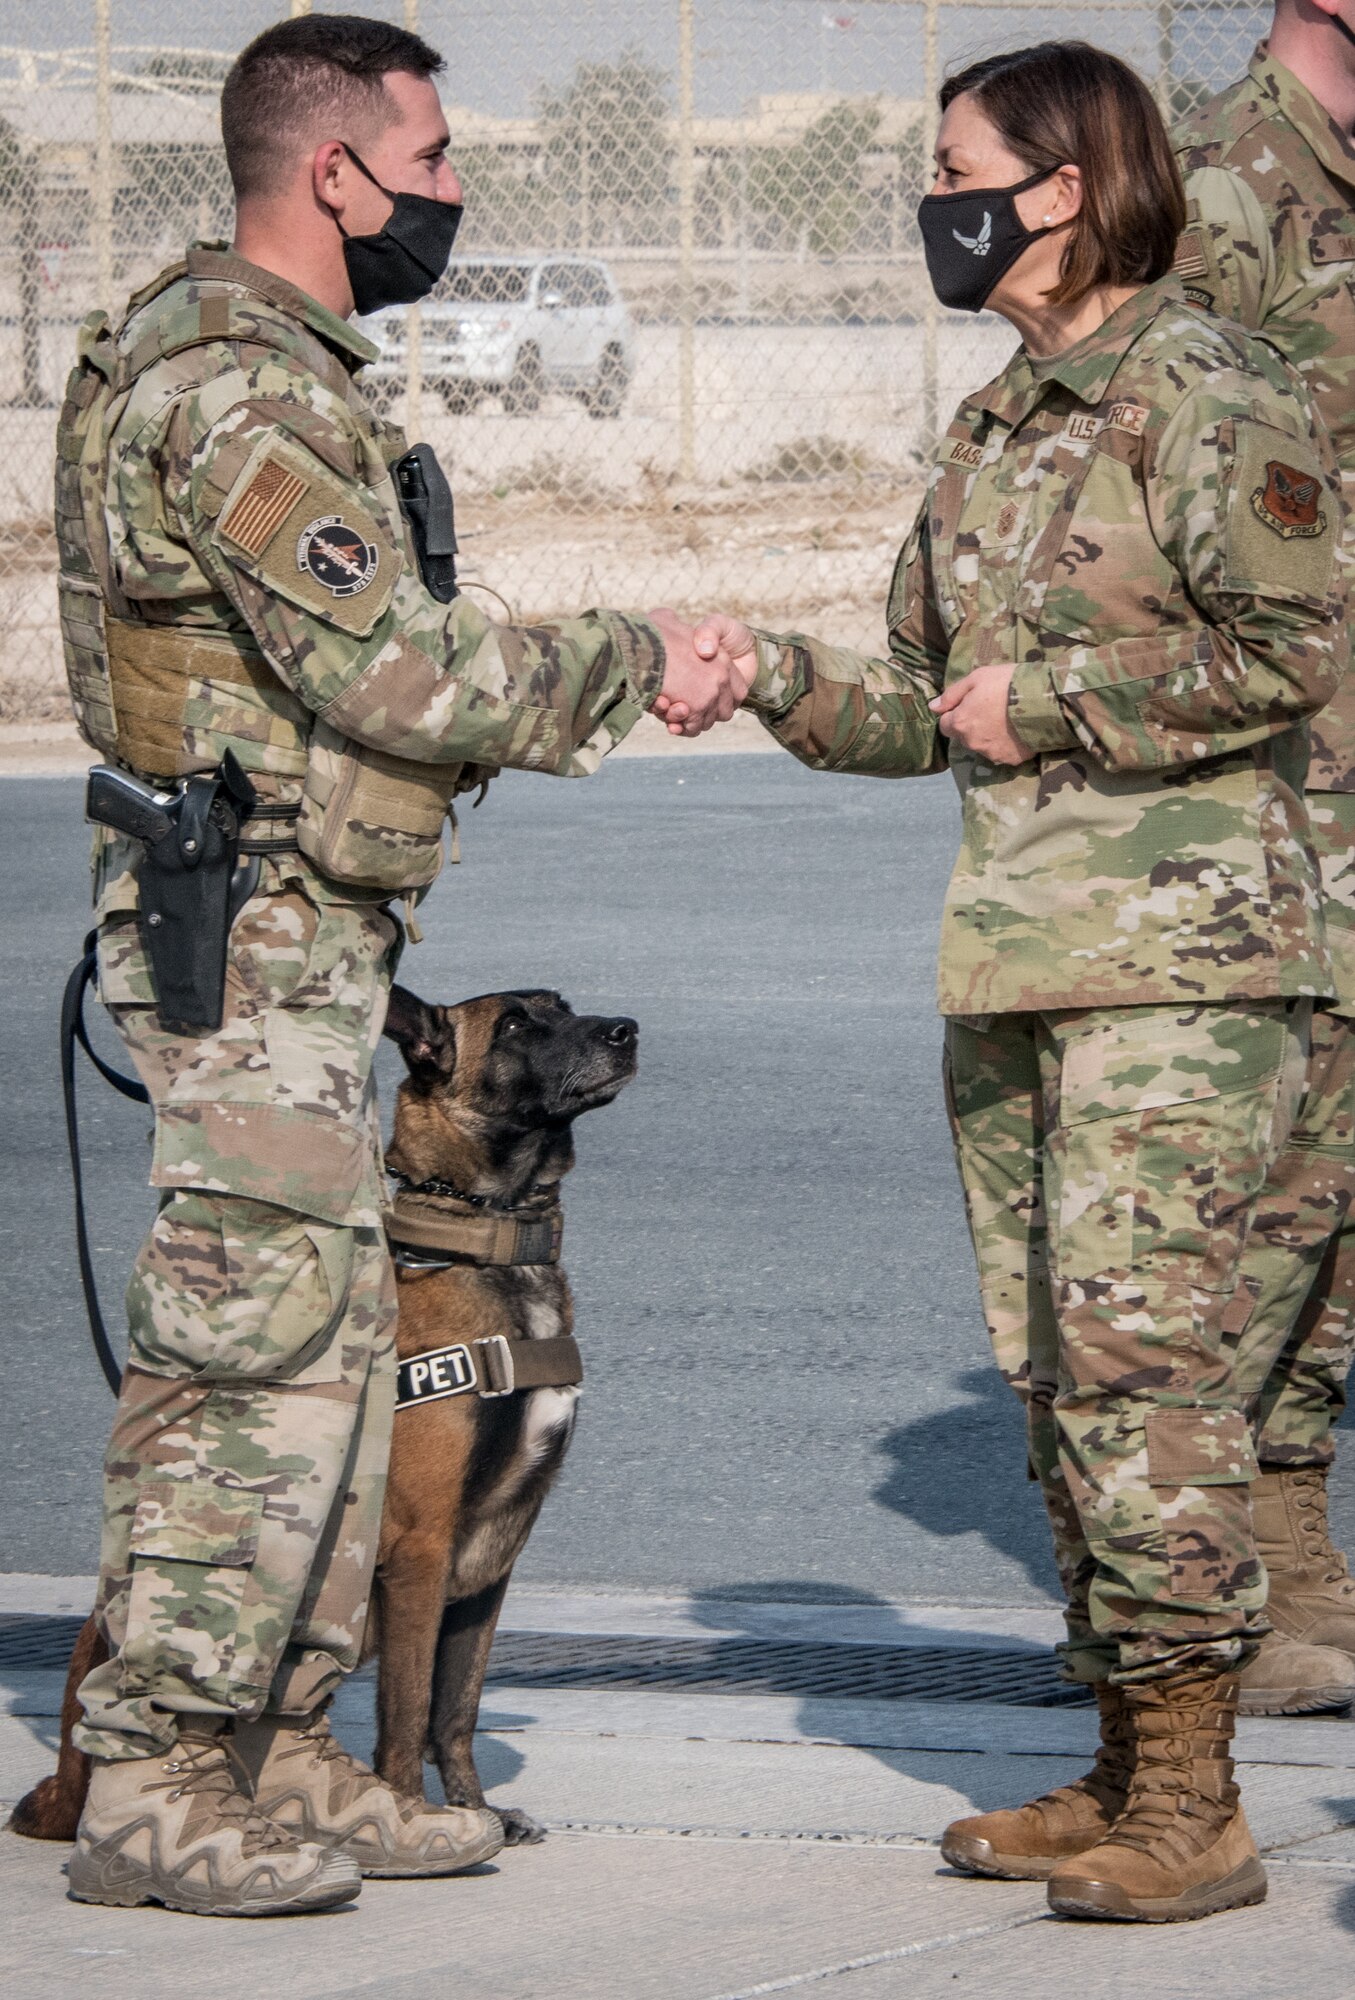 two people shake hands while a military working dog sits and observes